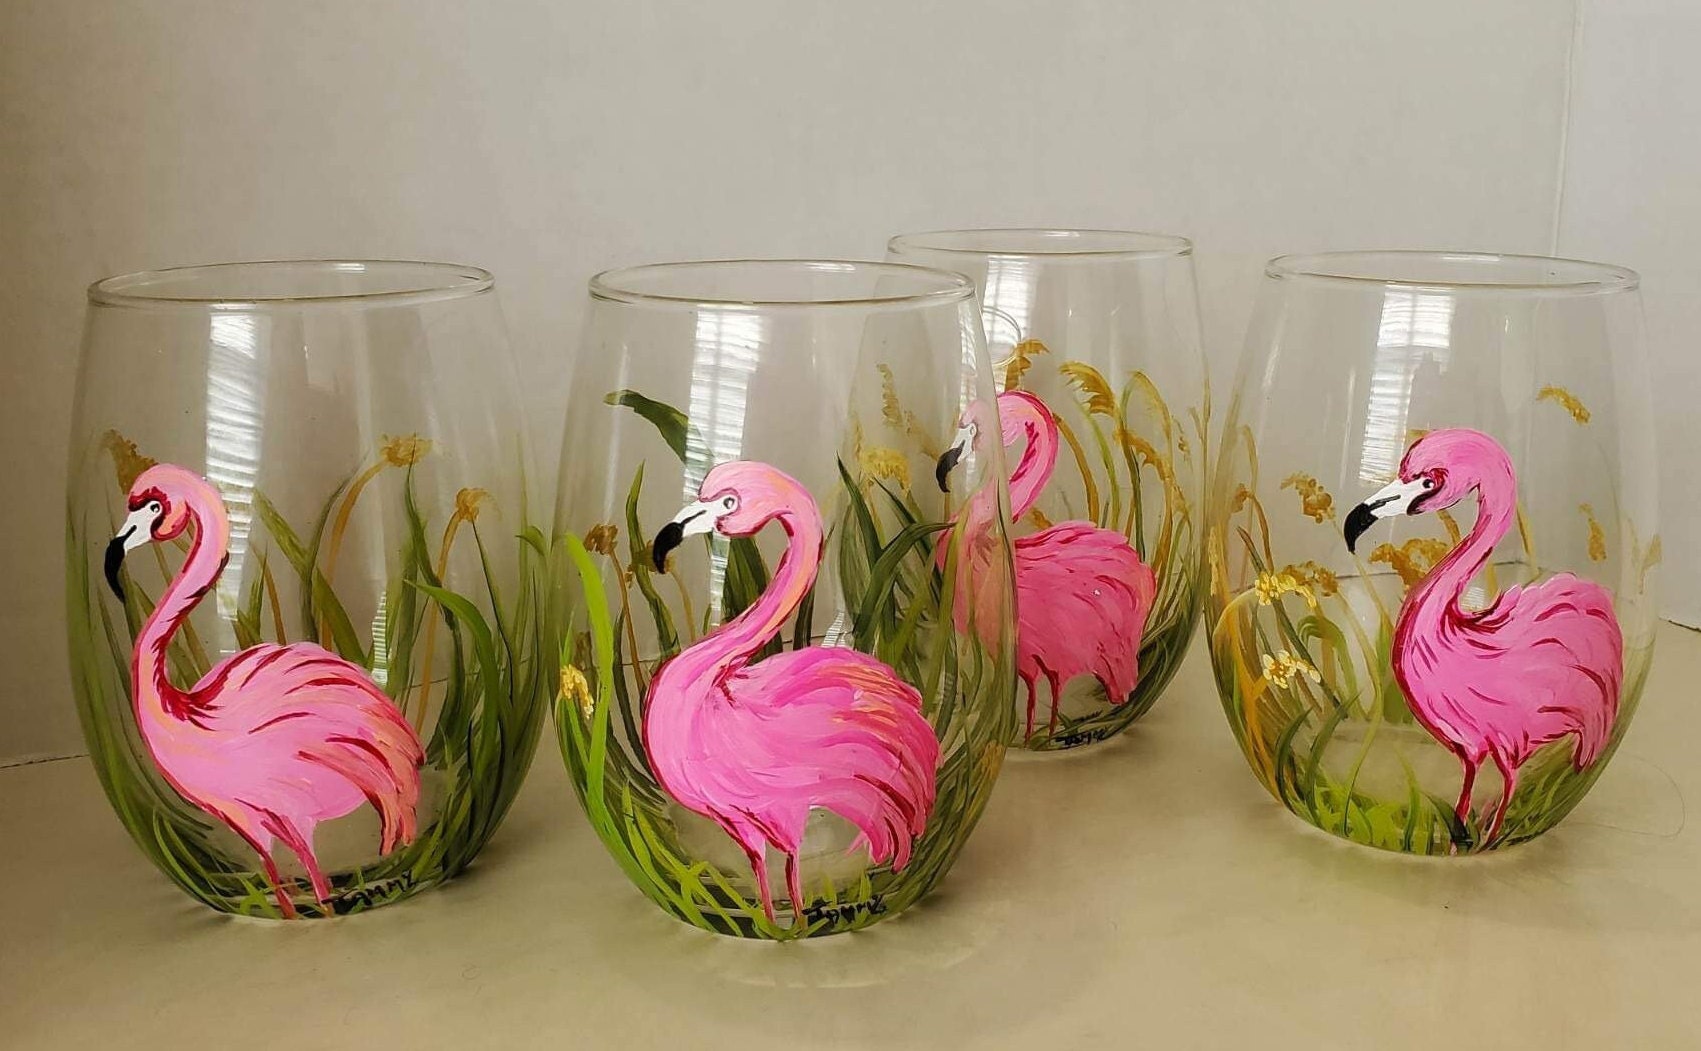 Drinking Glasses 4 Pink Flamingo Tropical 16oz Plastic Patio Pool Party